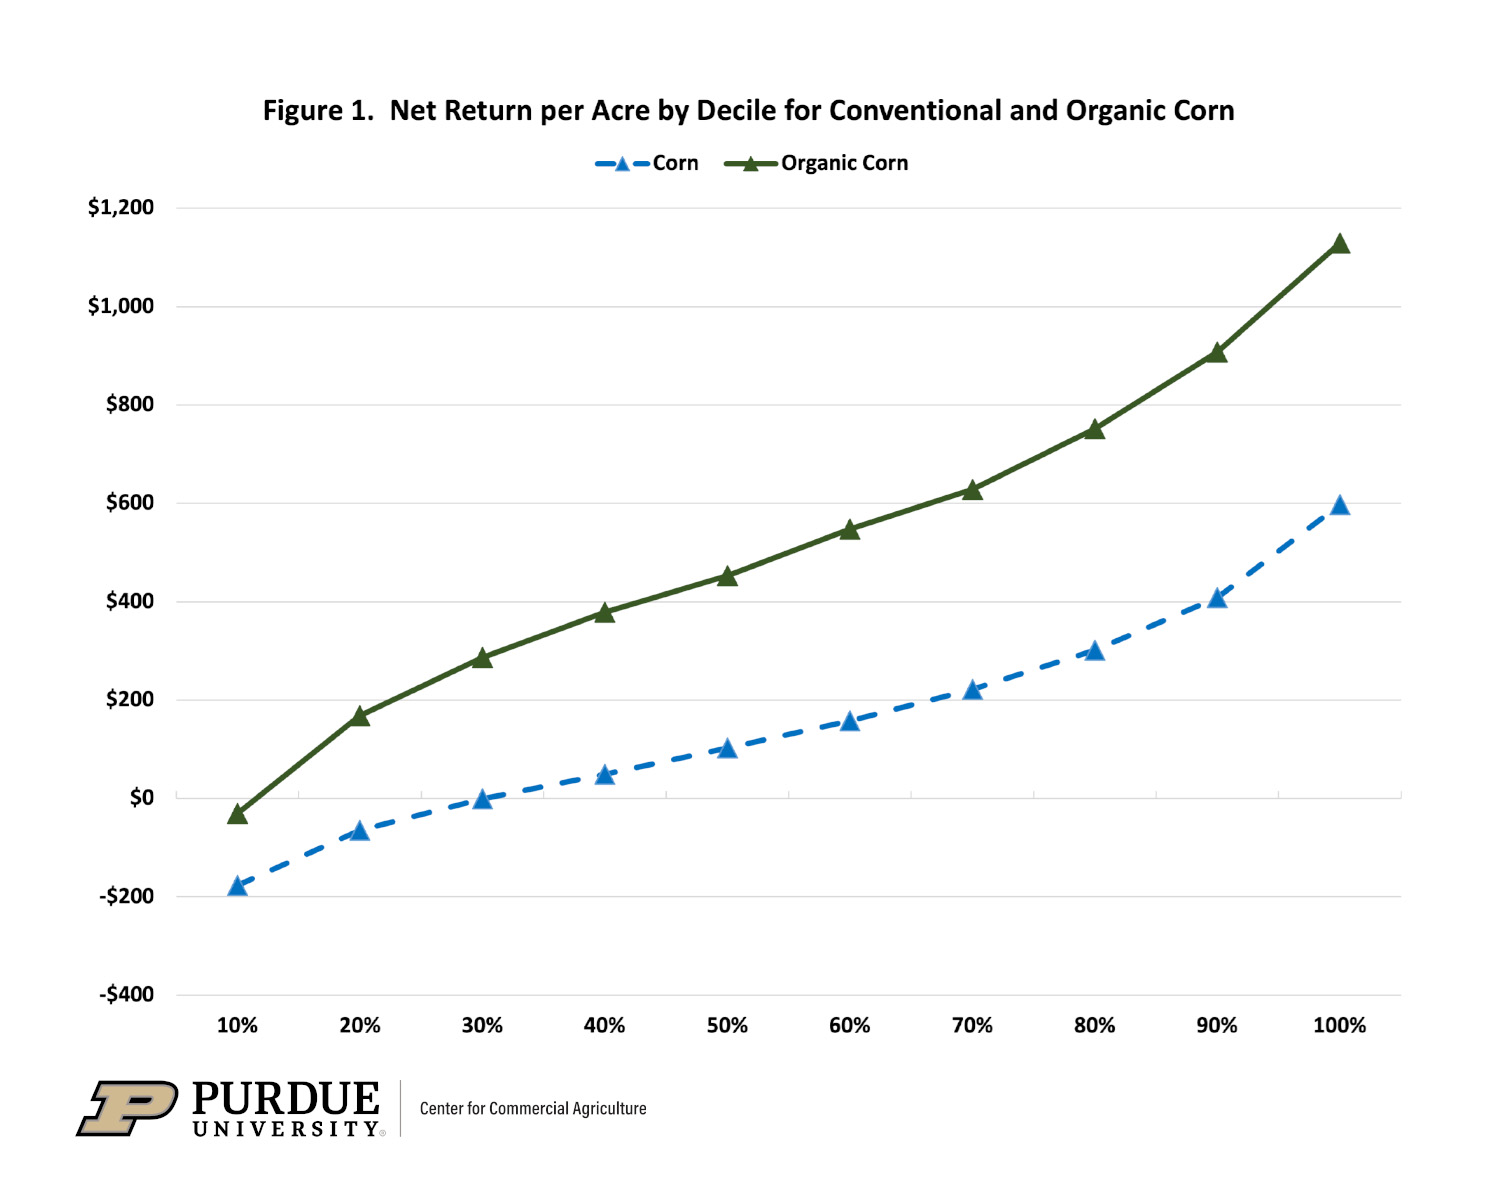 Figure 1. Net Return per Acre by Decile for Conventional and Organic Corn